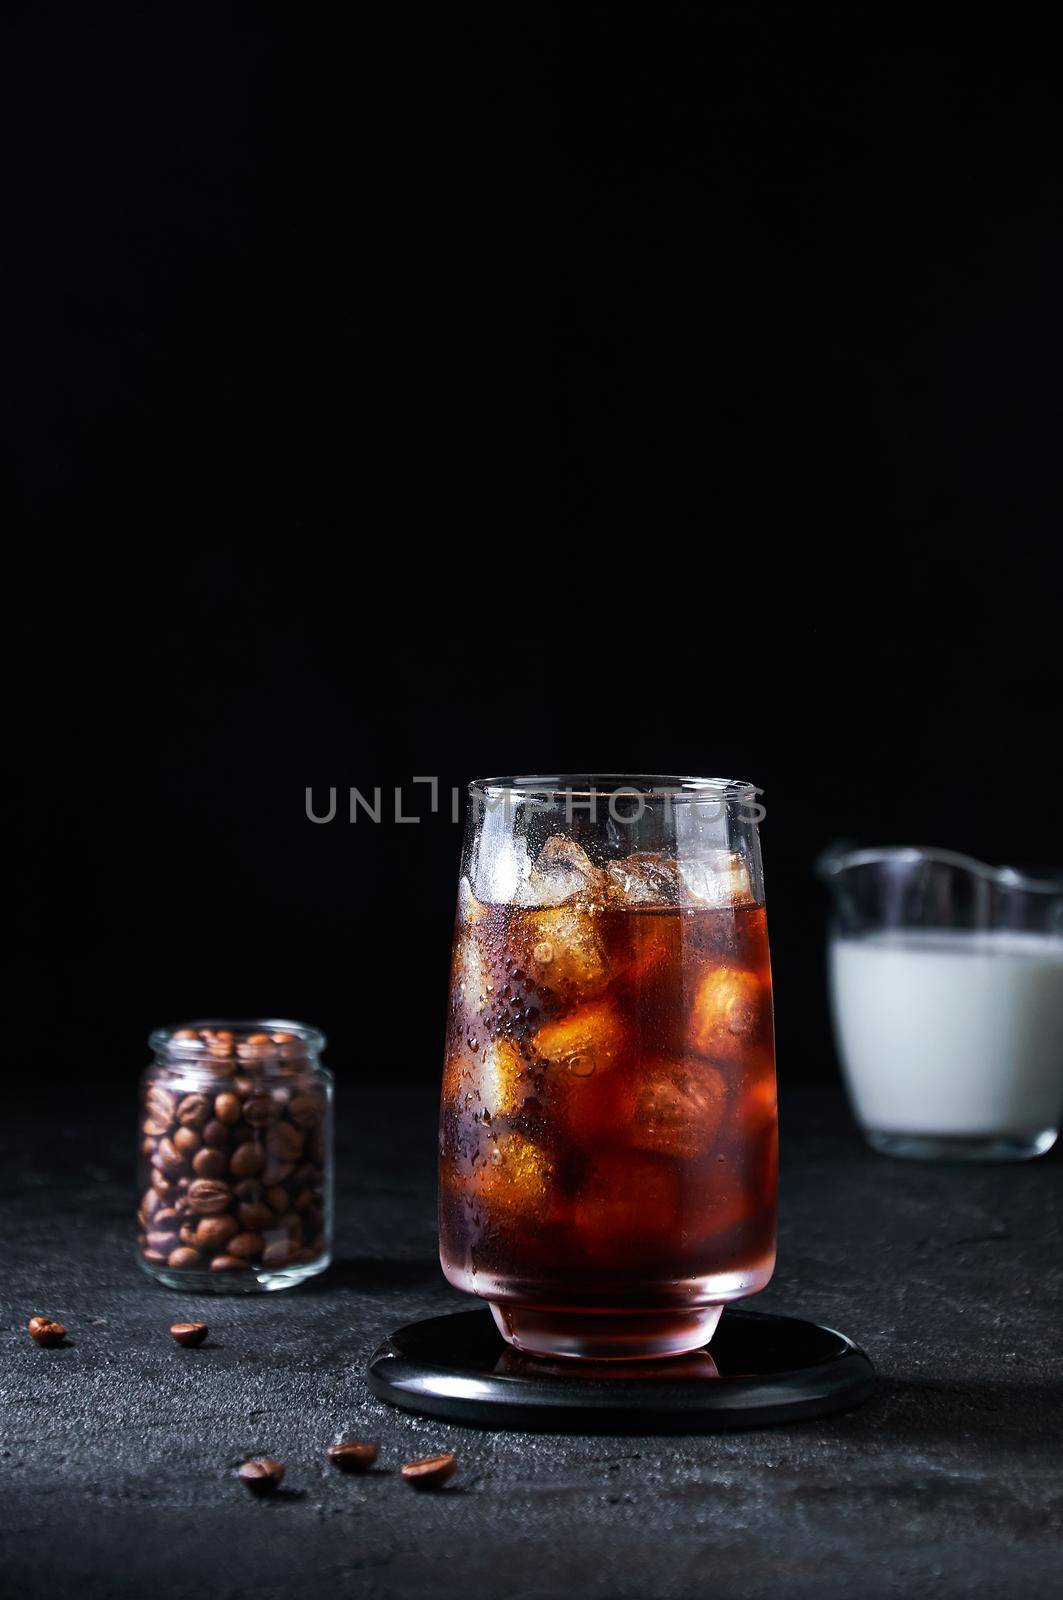 Iced Coffee in Tall Glass on Dark Background. Concept Refreshing Summer Drink.